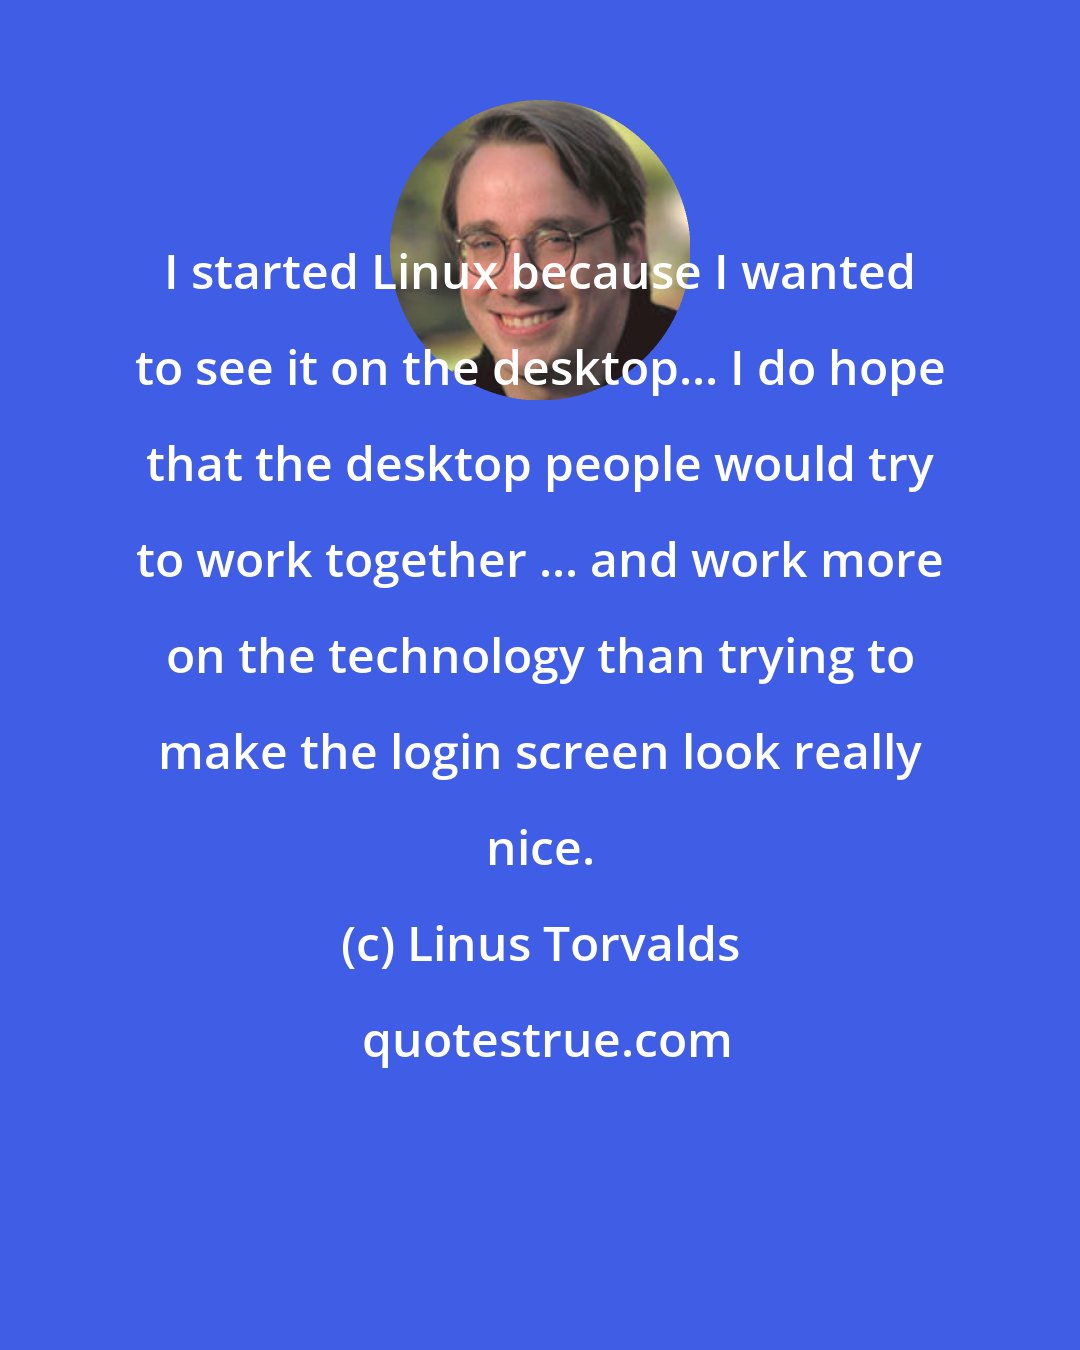 Linus Torvalds: I started Linux because I wanted to see it on the desktop... I do hope that the desktop people would try to work together ... and work more on the technology than trying to make the login screen look really nice.